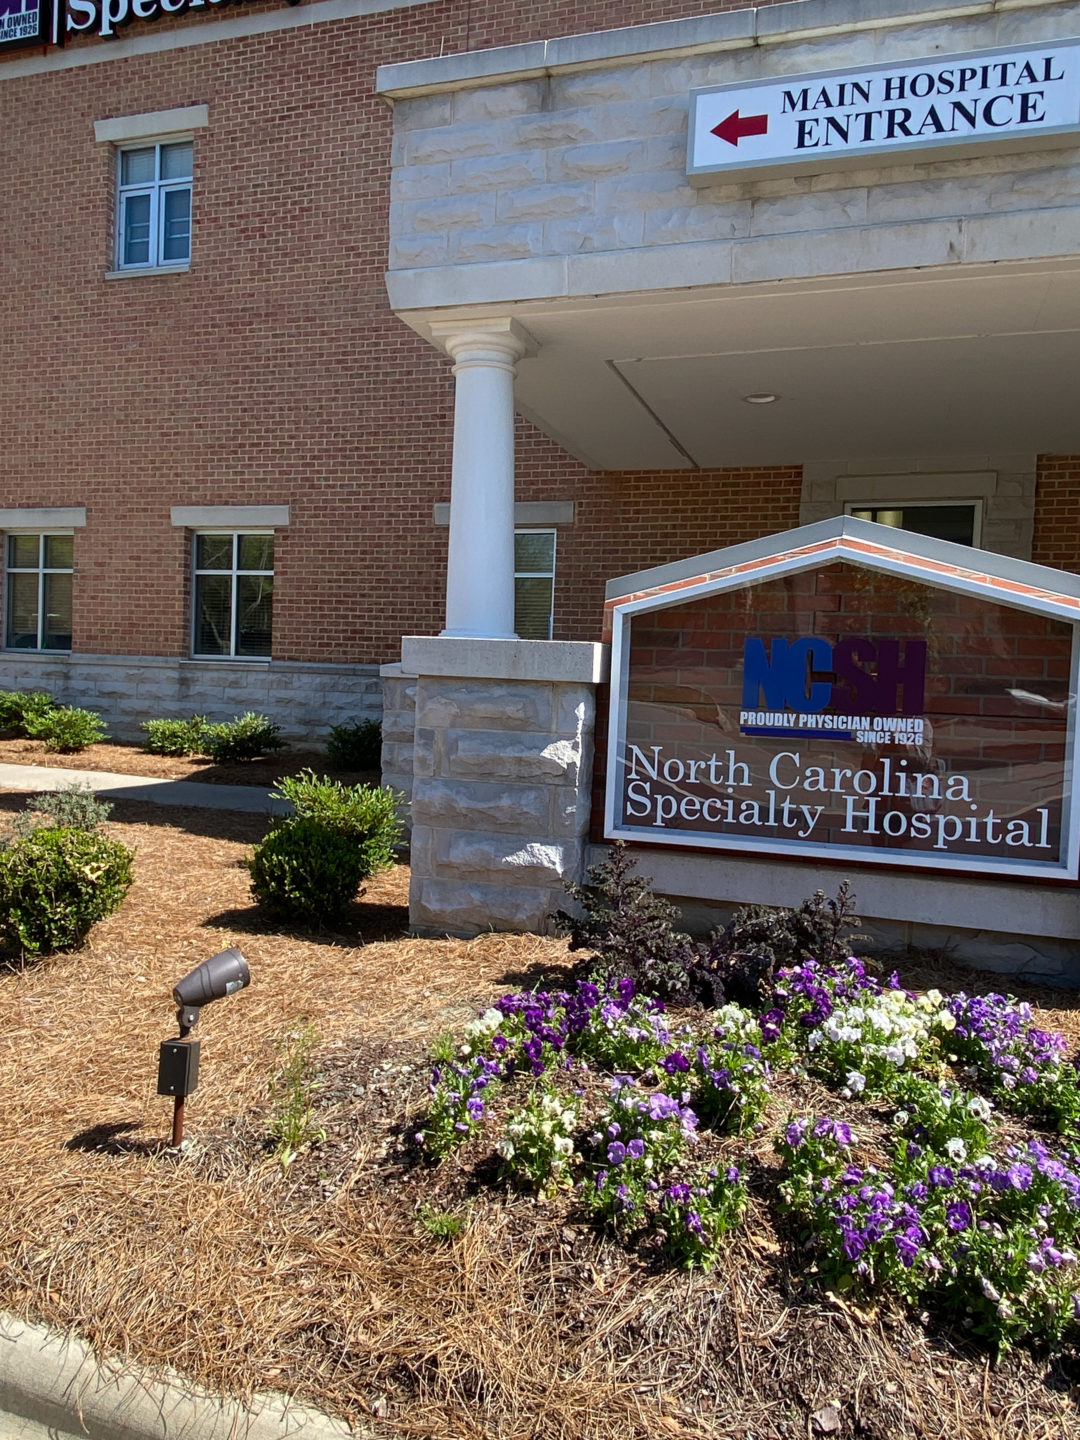 The exterior of the building shows the North Carolina Specialty Hospital sign surrounded by flowers. 